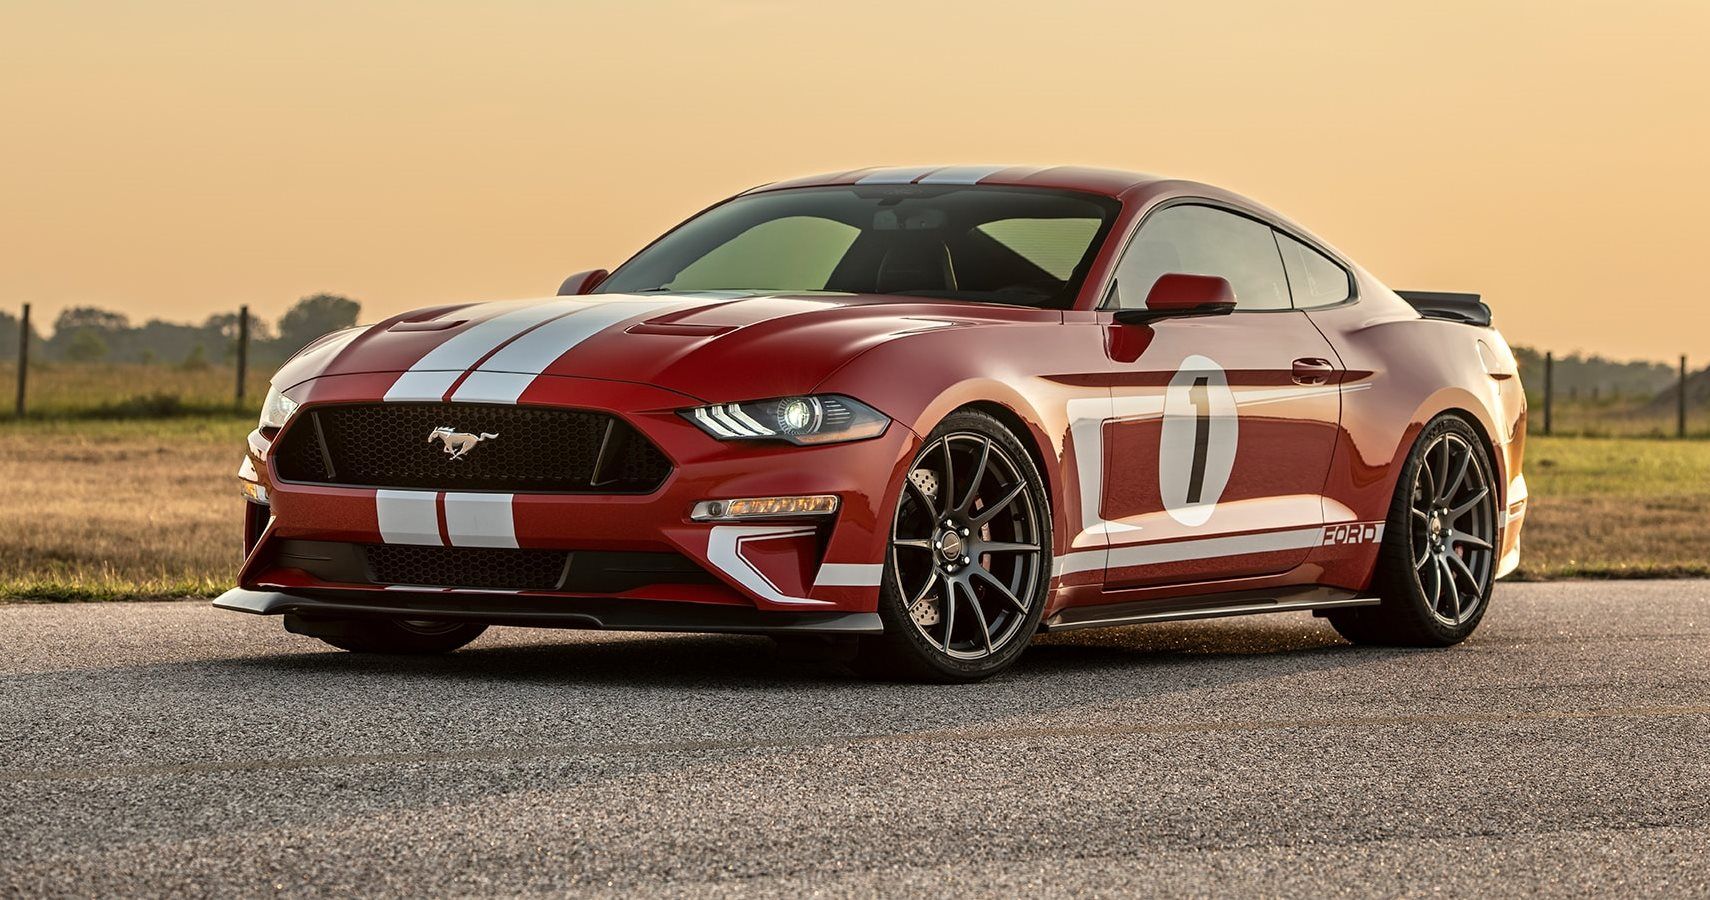 Hennessey’s Heritage Edition Mustang Offers Insane Power